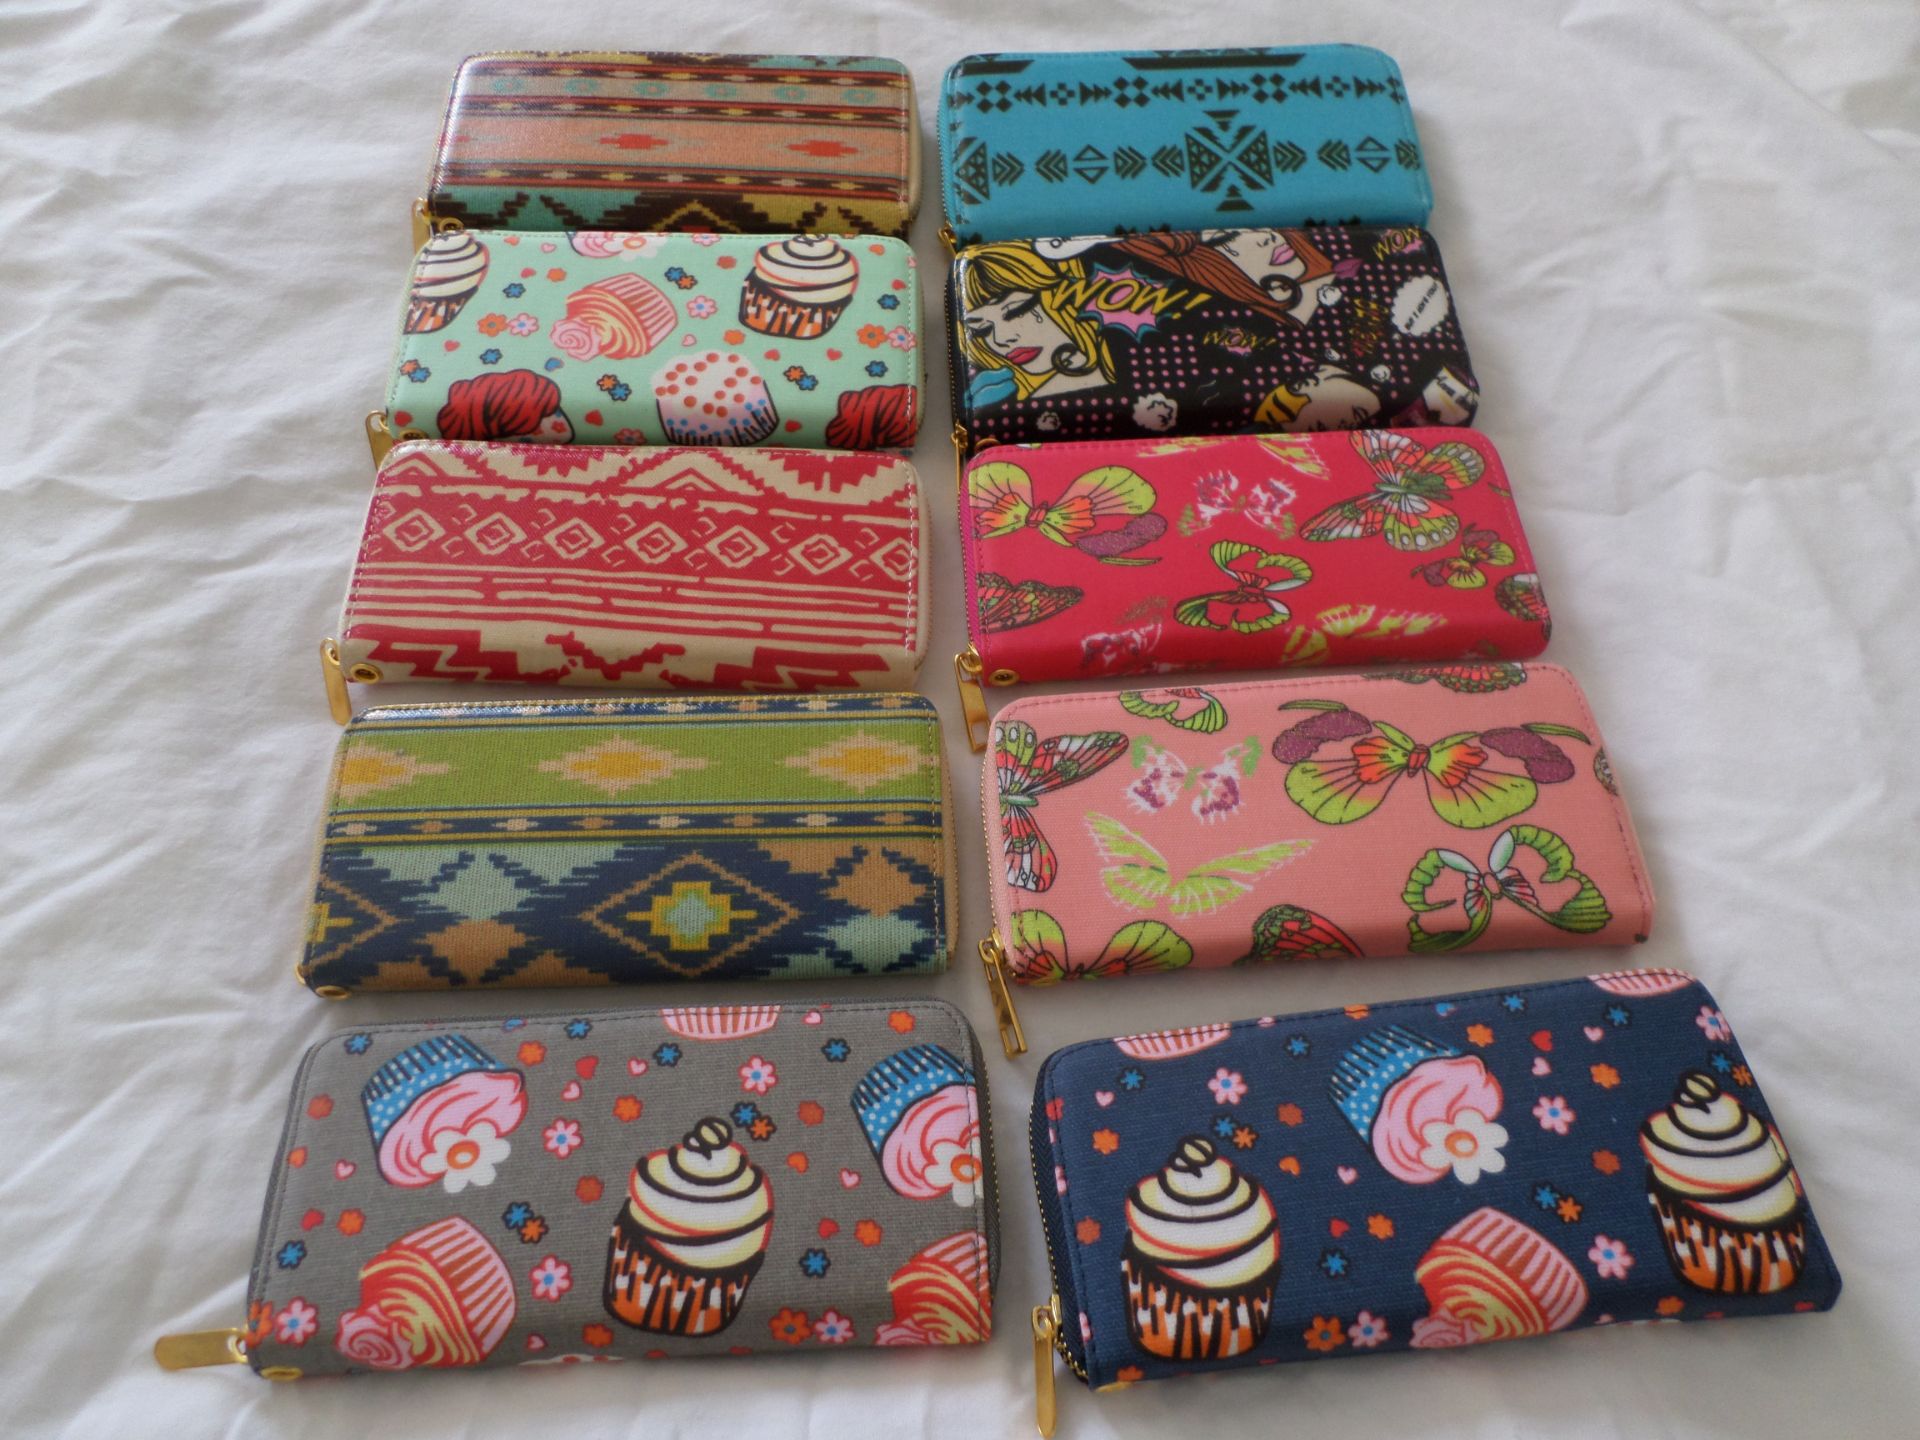 10 x Ladies Clutch/Purses RRP £14 Each. Brand New - Image 3 of 4